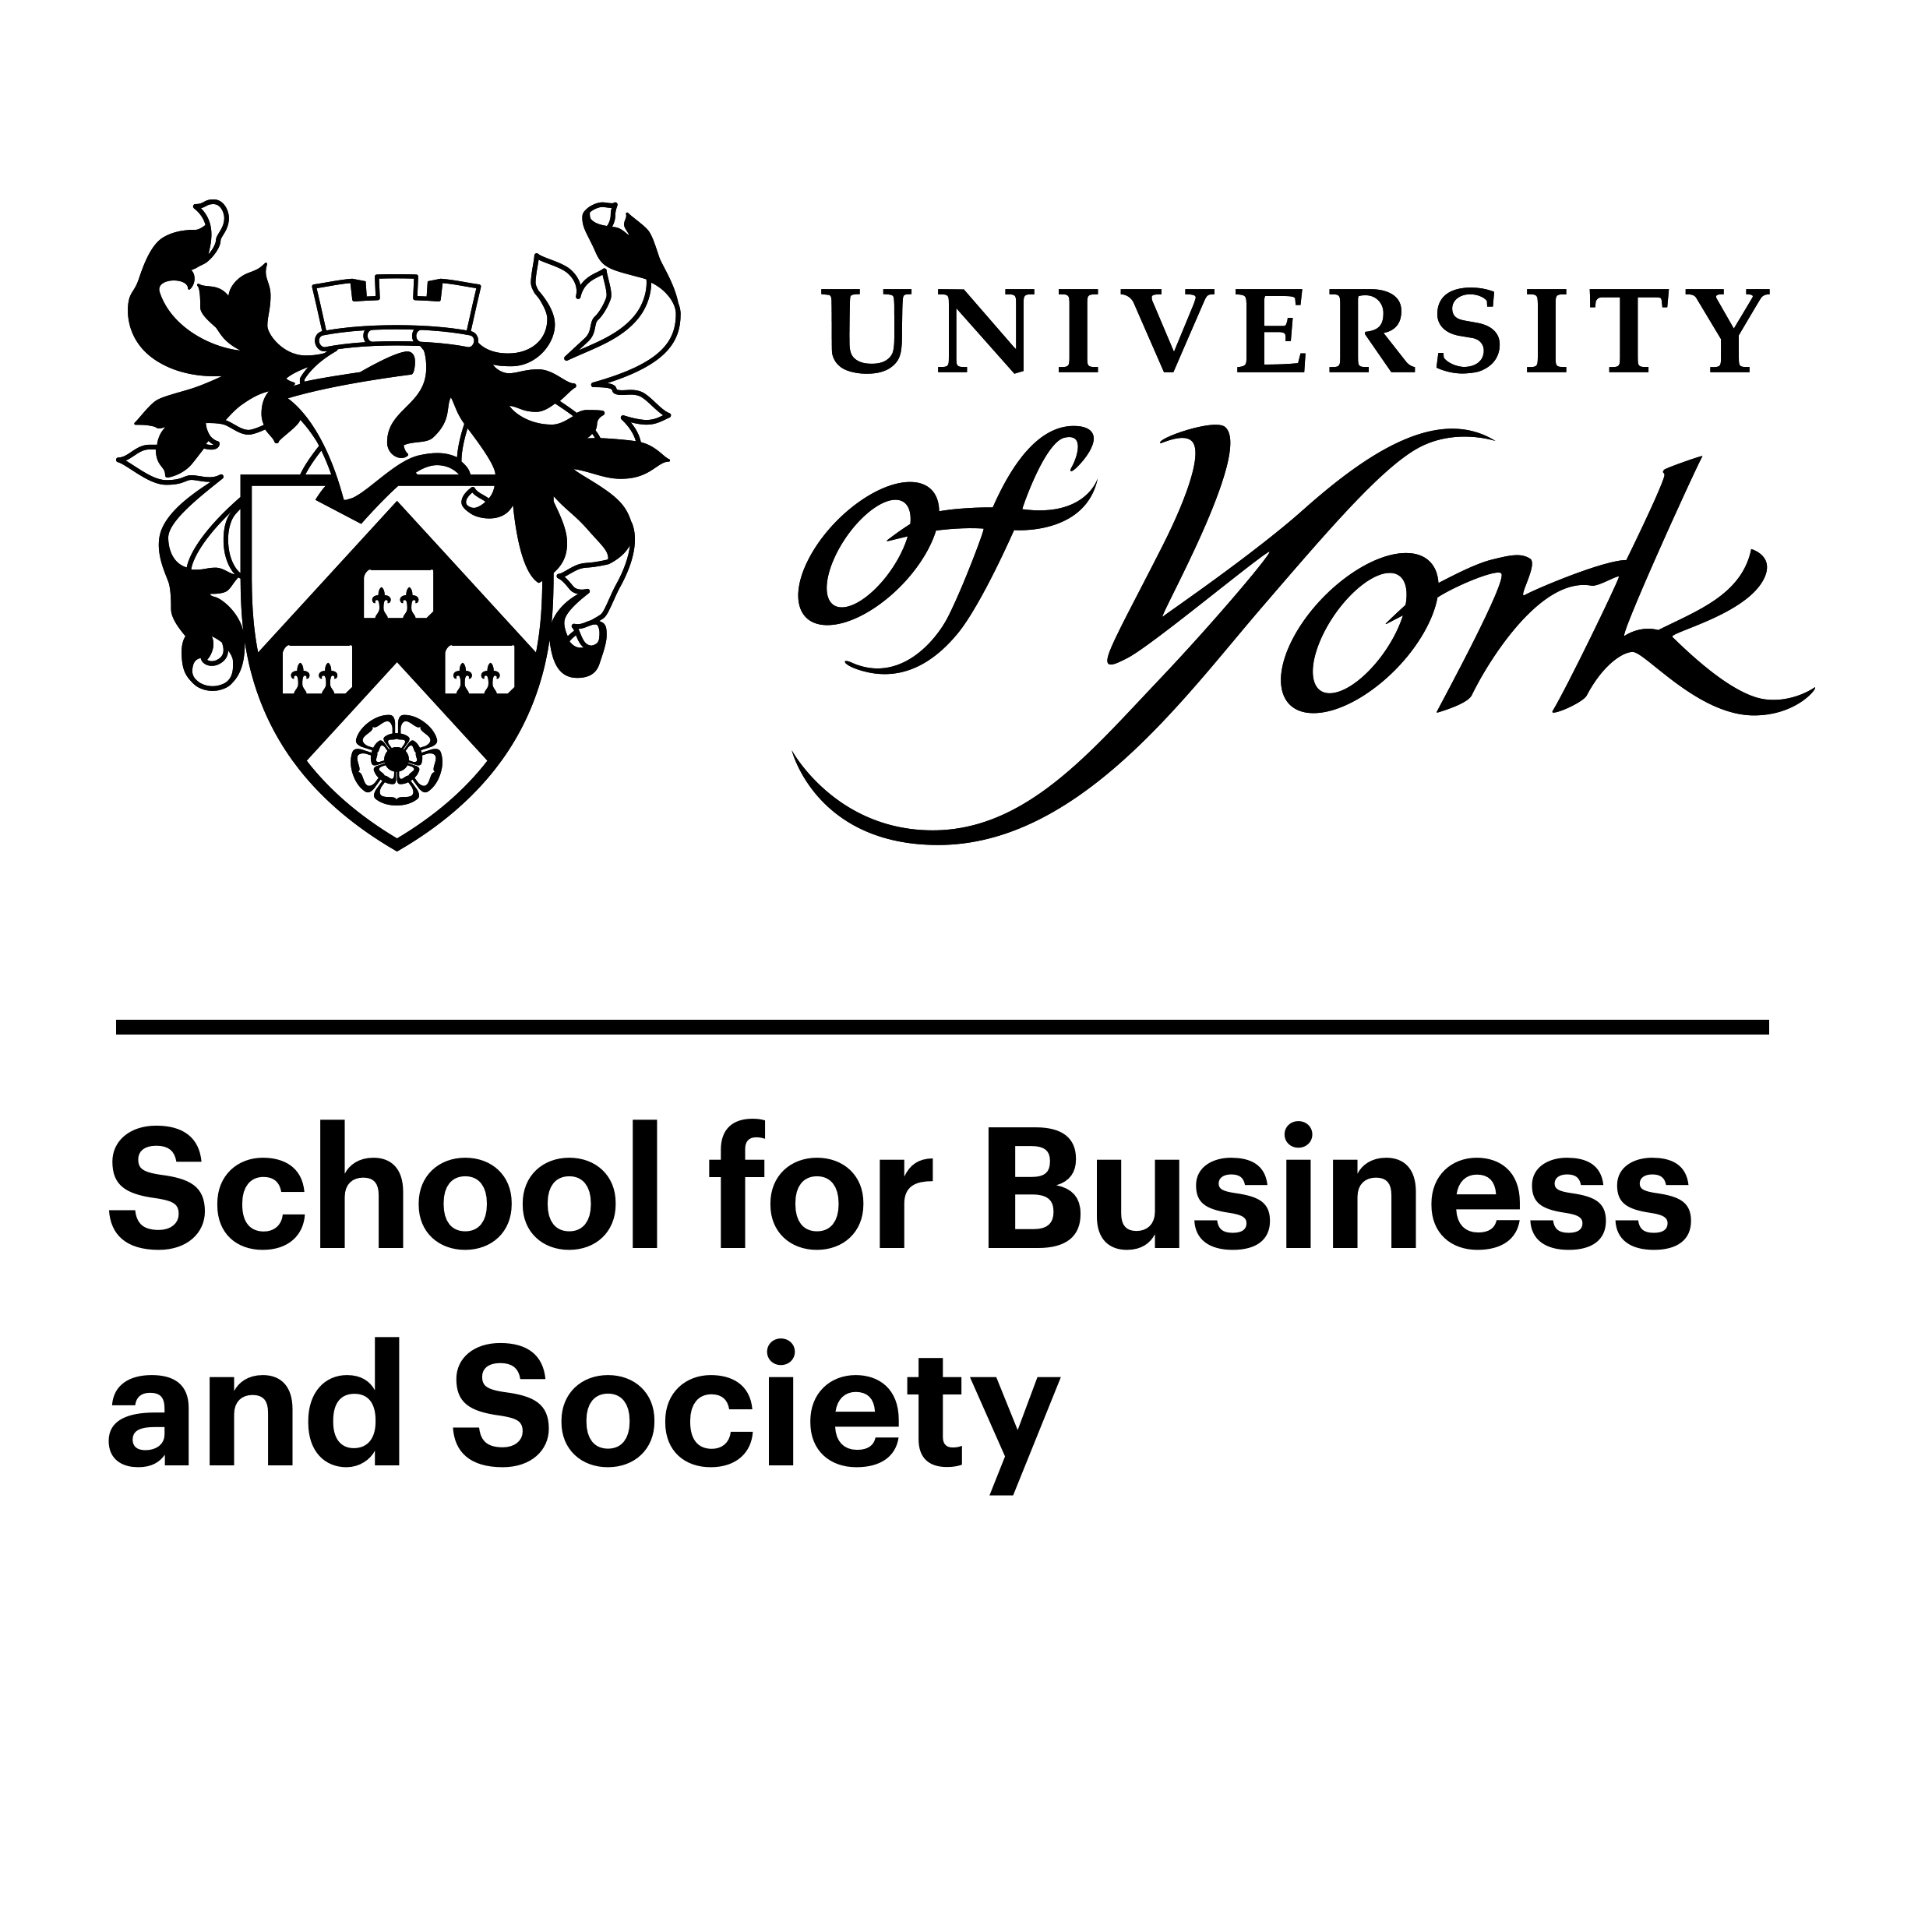 School for Business and Society